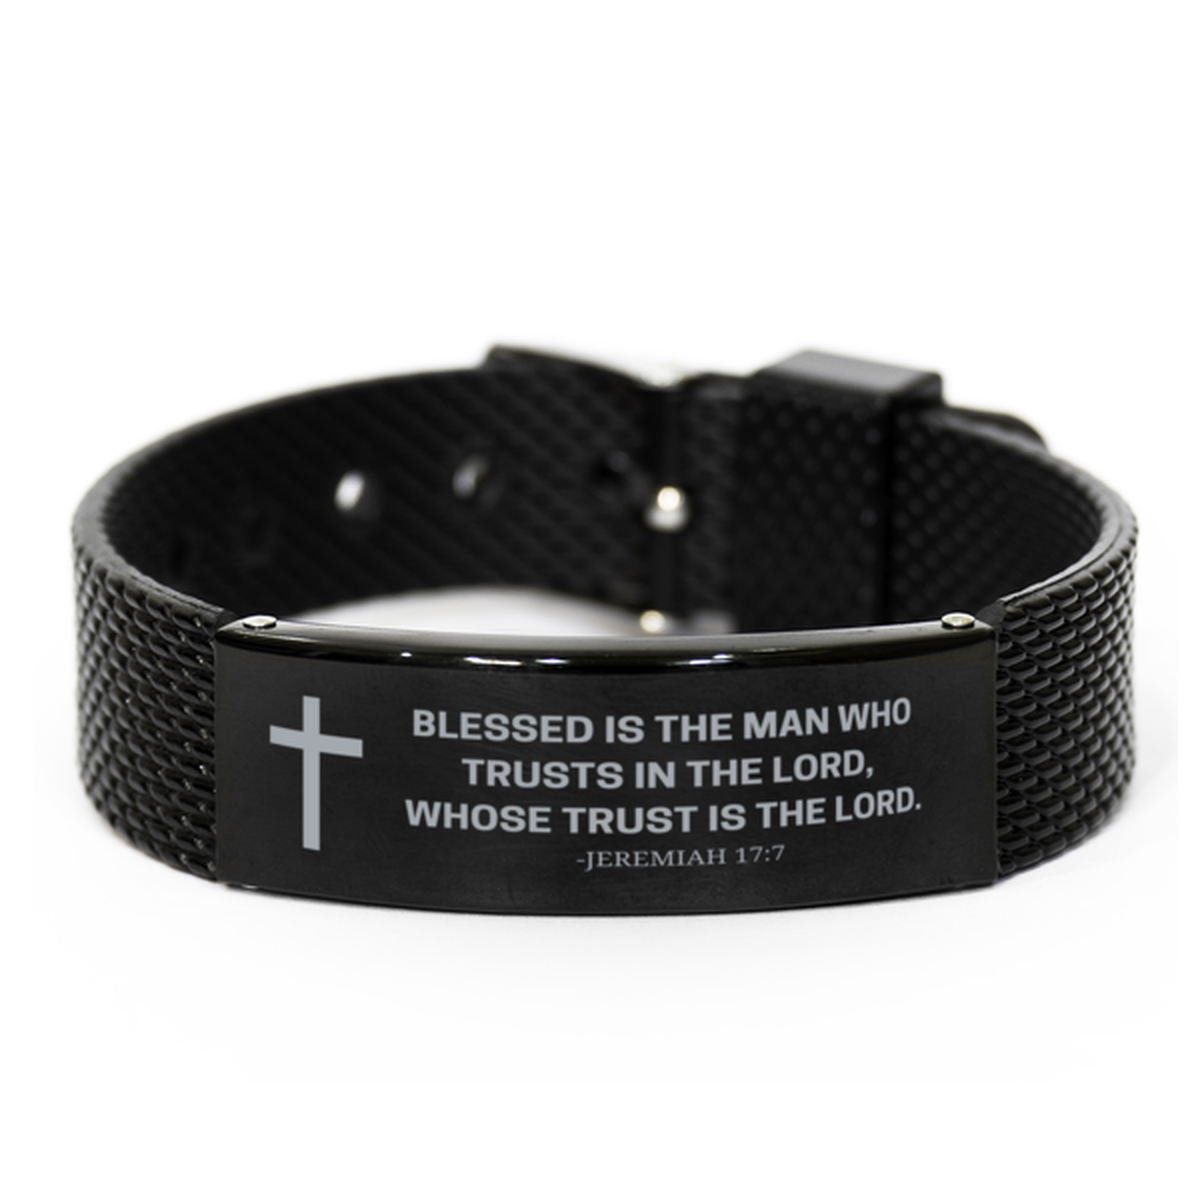 Baptism Gifts For Teenage Boys Girls, Christian Bible Verse Black Shark Mesh Bracelet, Blessed is the man who trusts, Catholic Confirmation Gifts for Son, Godson, Grandson, Nephew